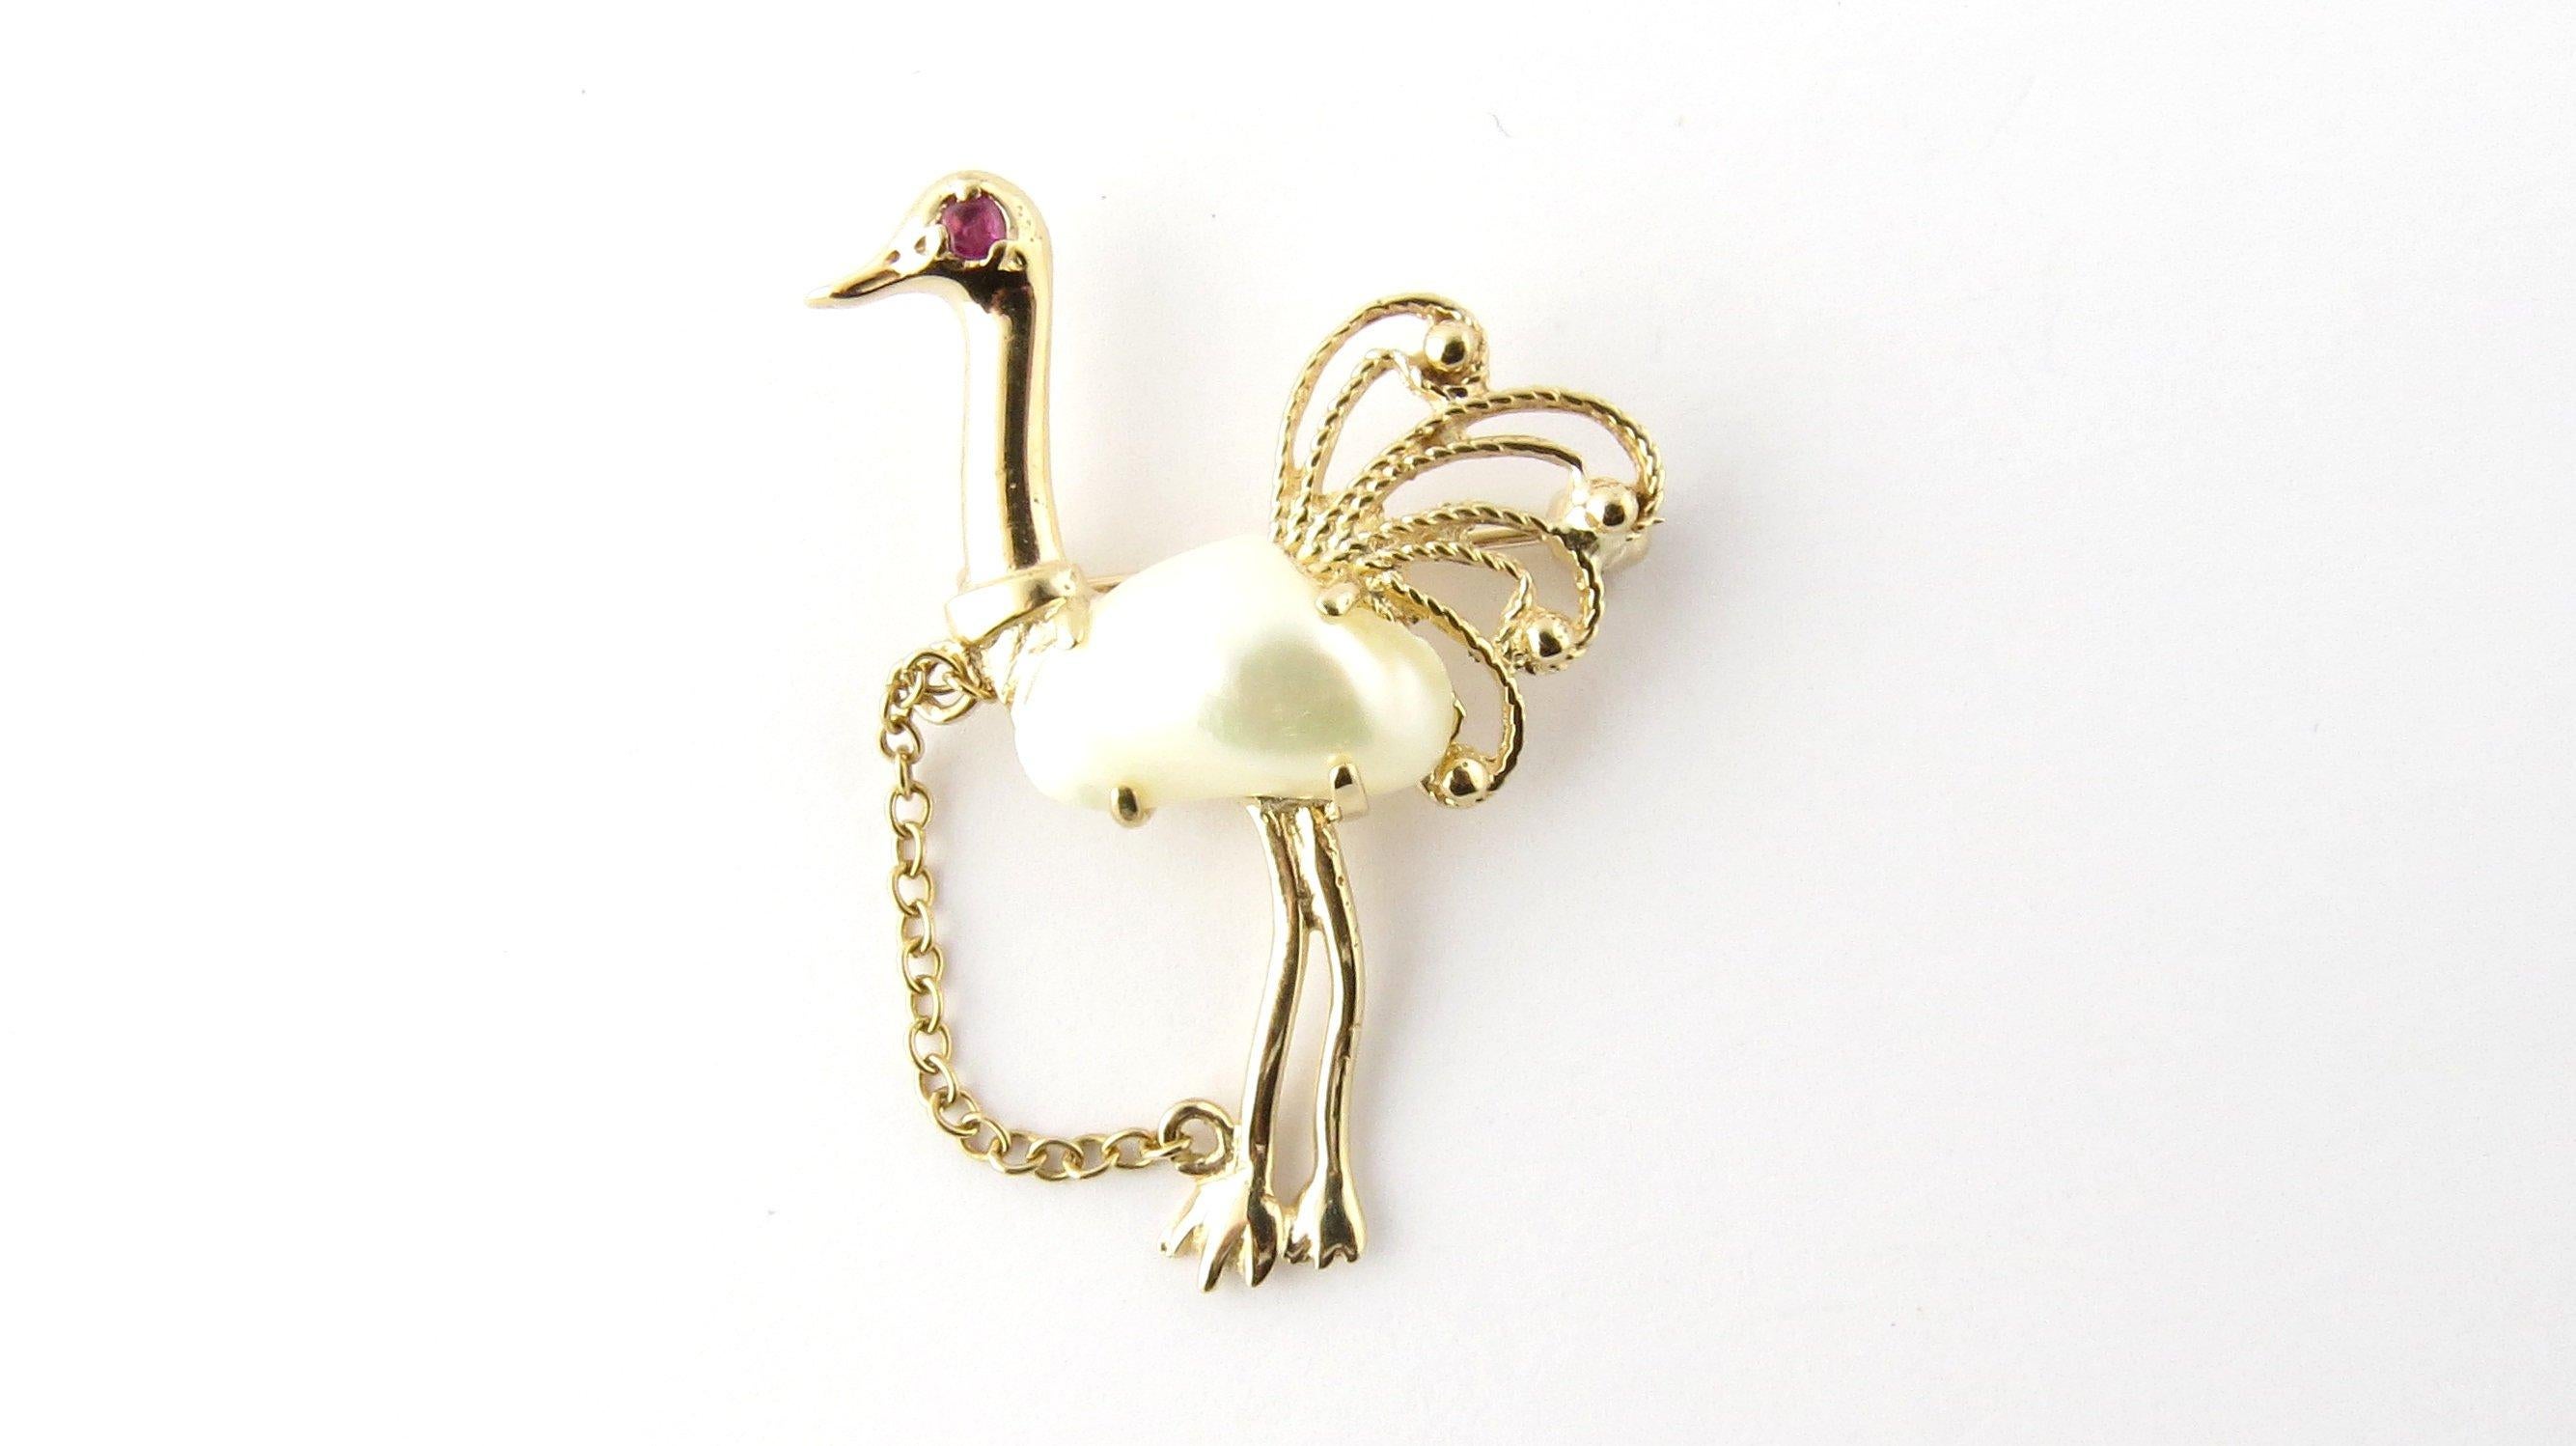 Vintage 14 Karat Yellow Gold Pearl and Ruby Ostrich Brooch/Pin-

This beautiful brooch features a lovely ostrich decorated with one pearl (12 mm x 9 mm) and one genuine ruby. Meticulously detailed in 14K yellow gold.

Size: 35 mm x 26 mm

Weight: